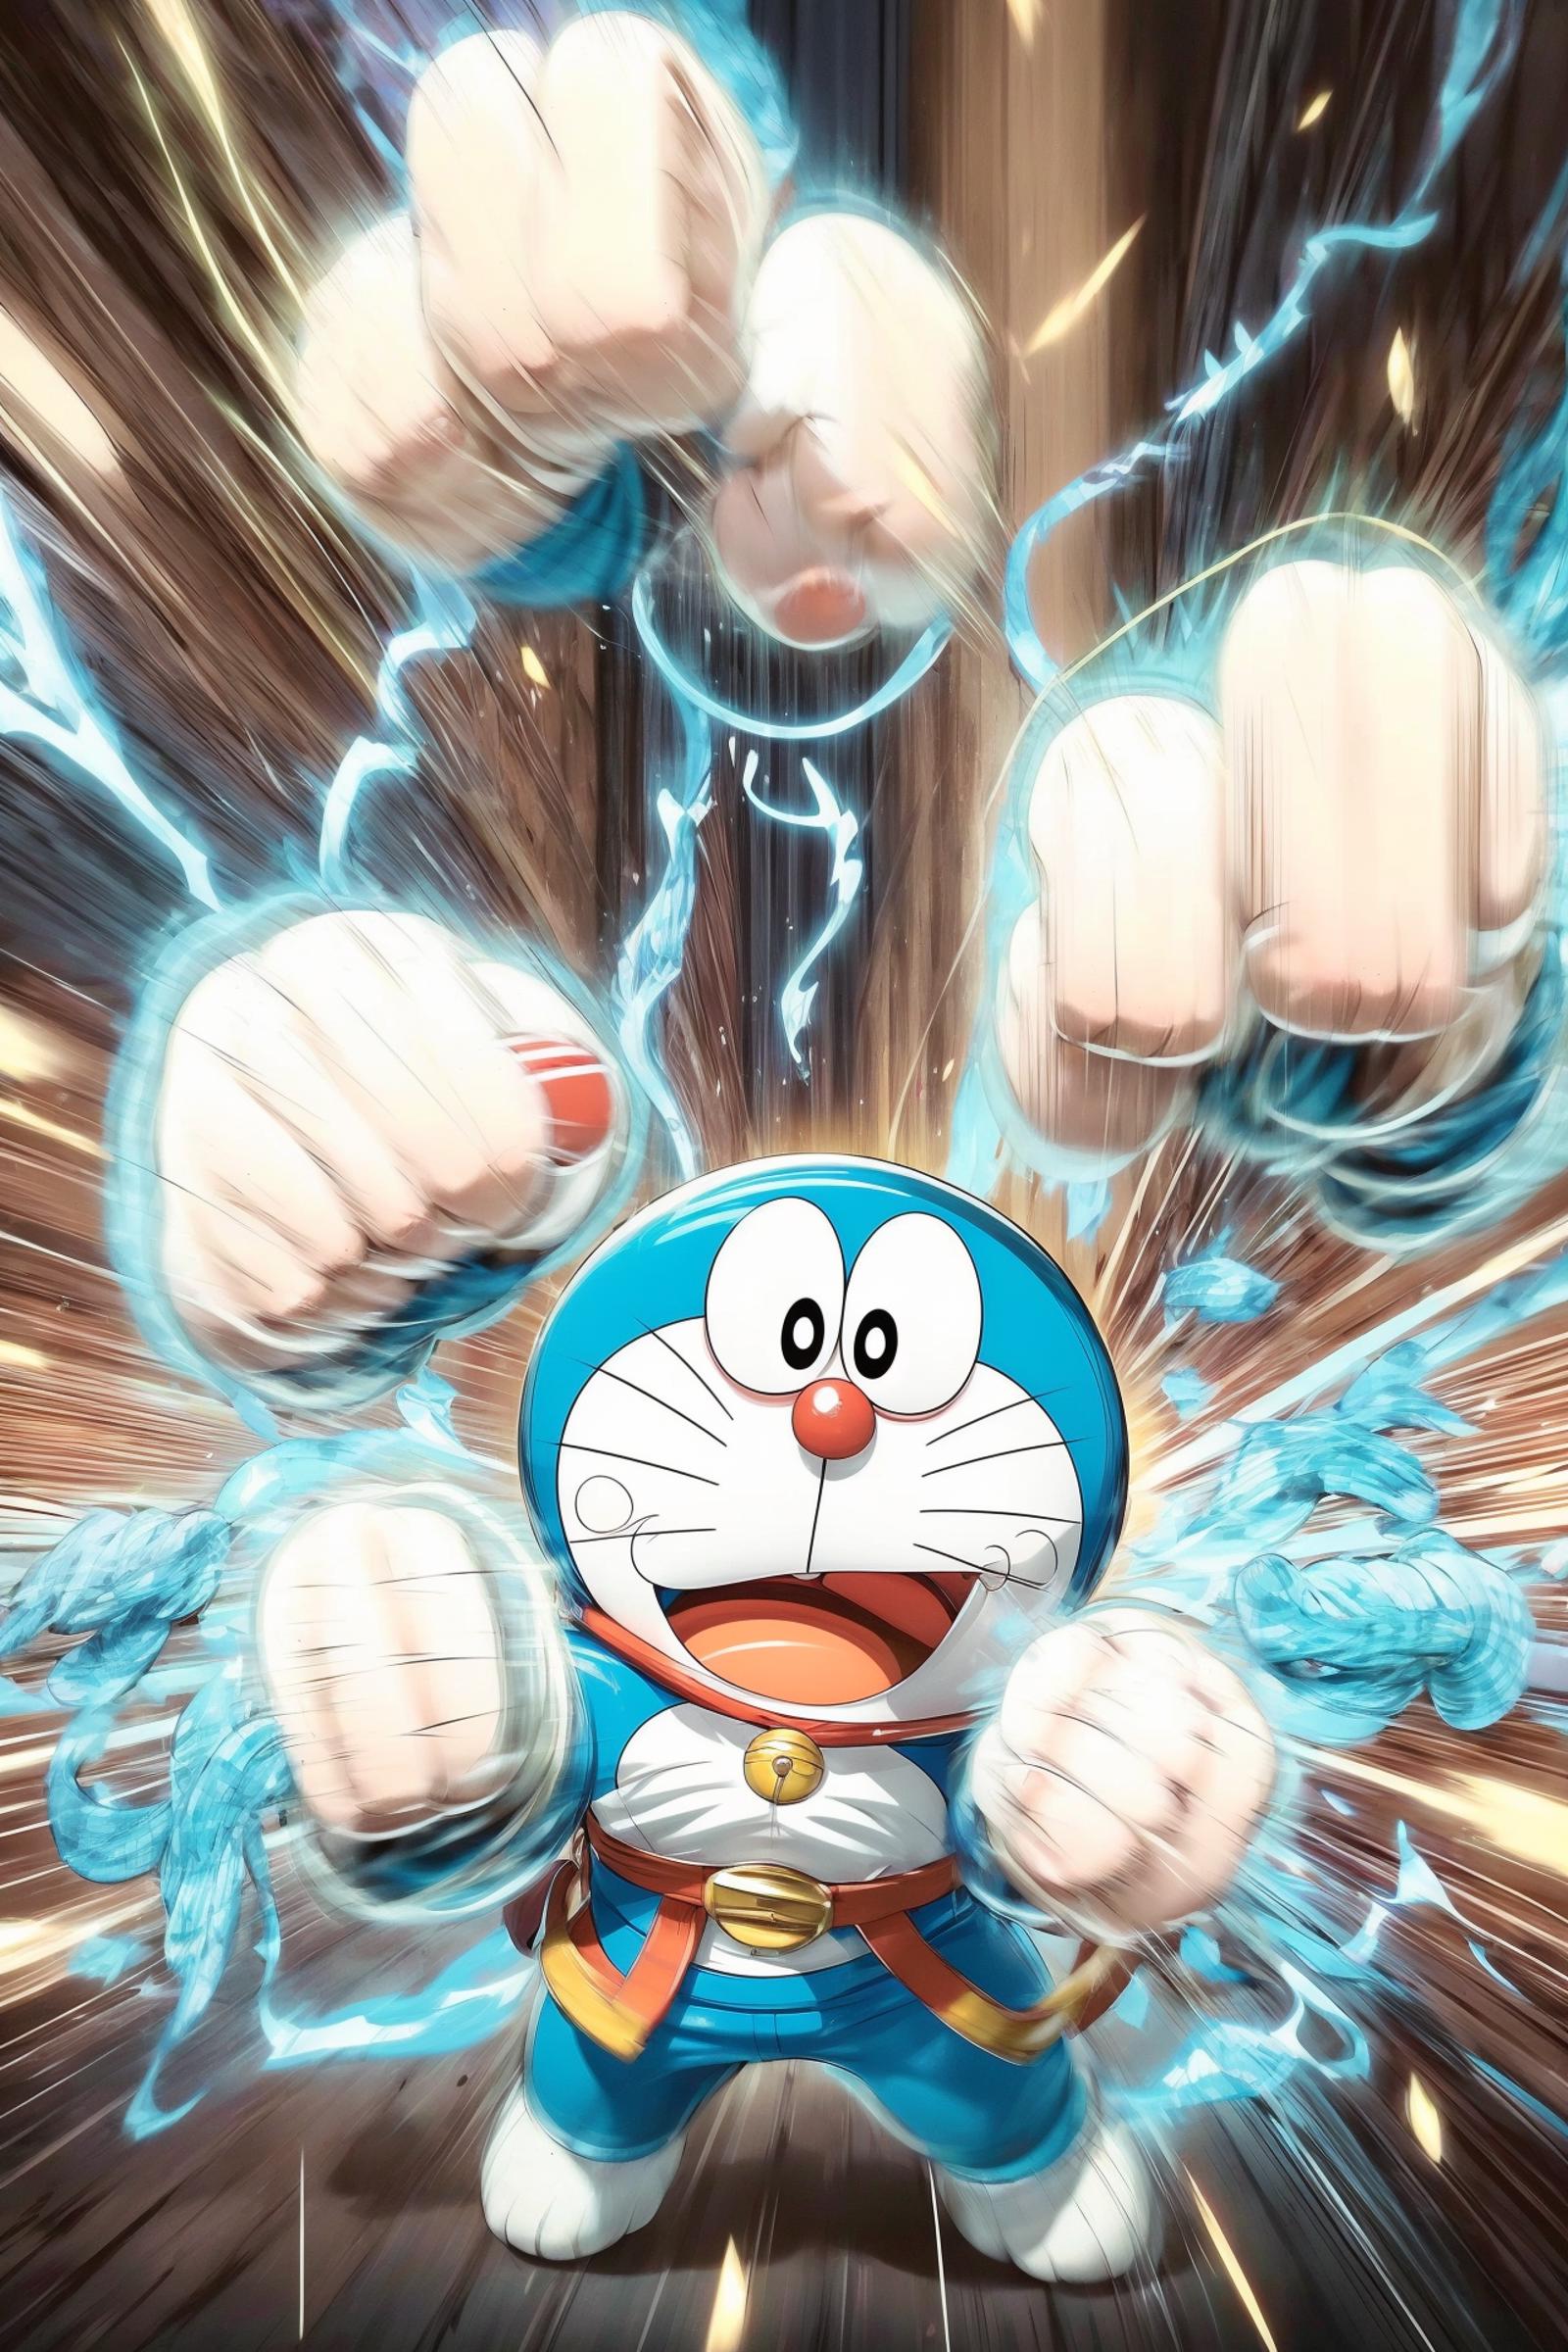 A Doraemon Cartoon Character in Action, Punching and Creating Electrical Spark Effects